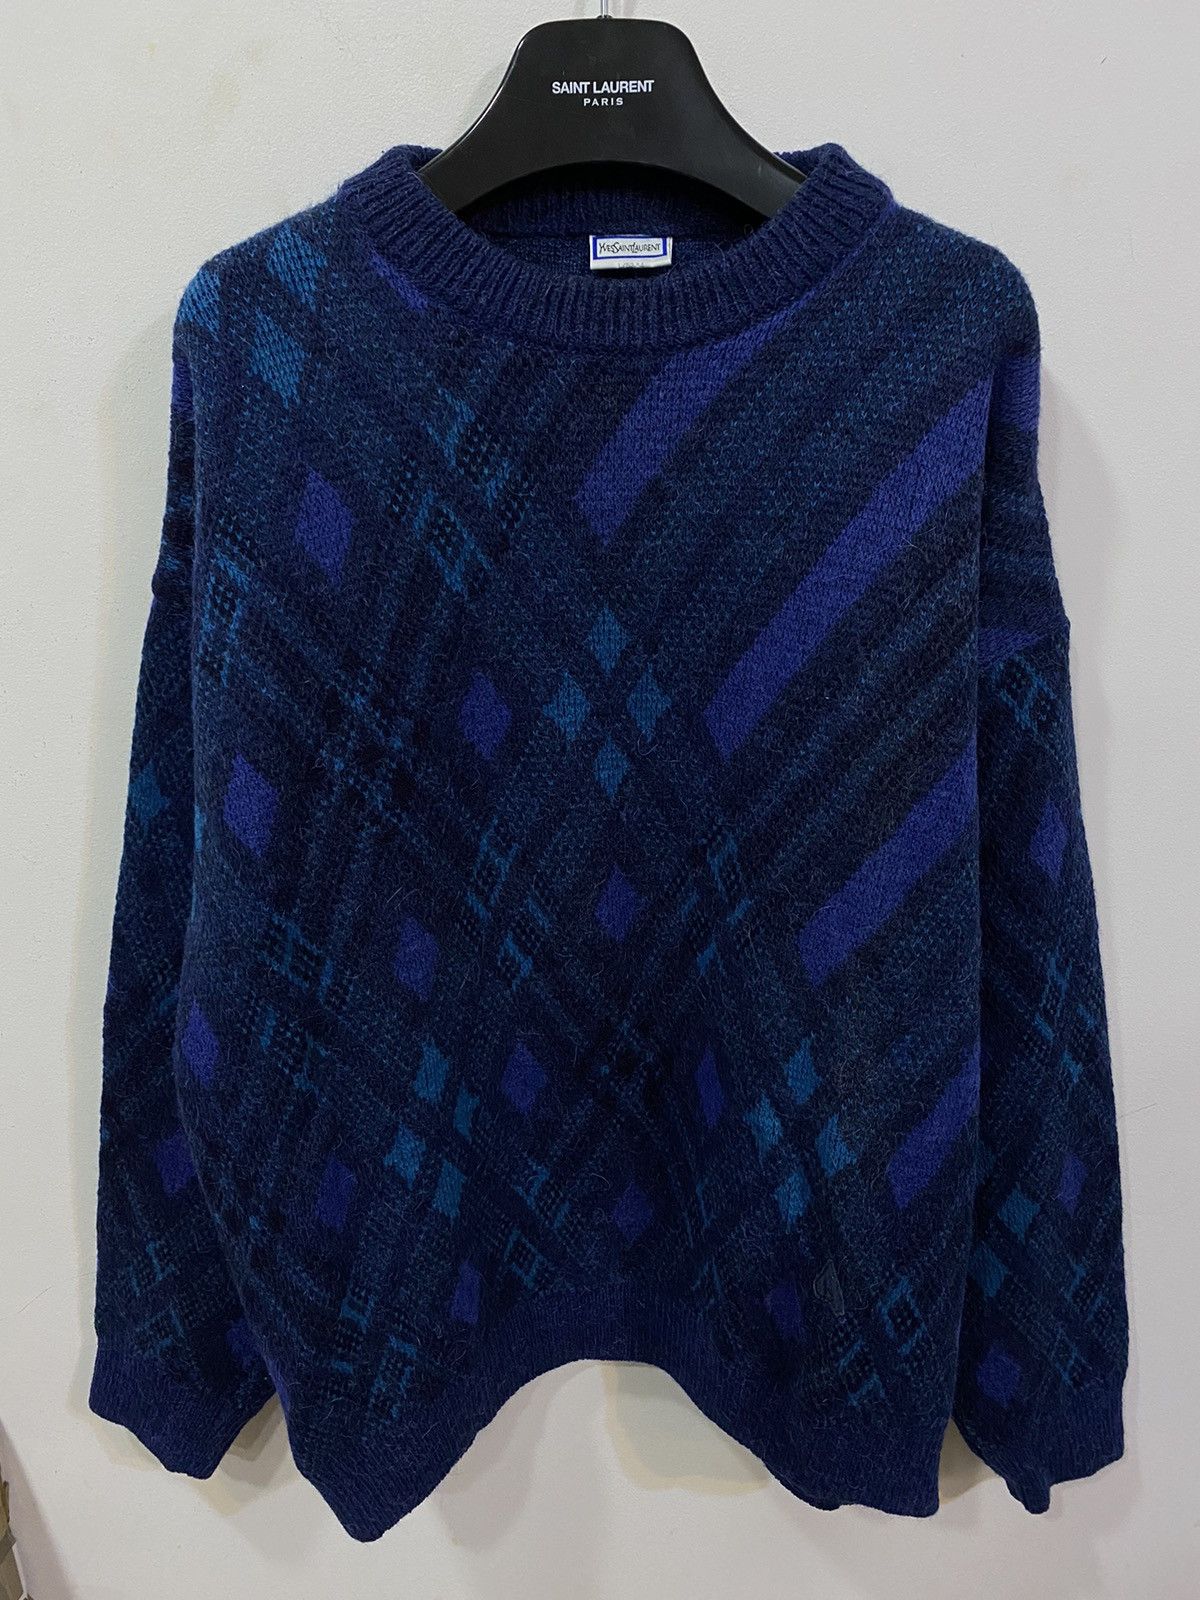 Vintage Wool 90's YSL Sweater Soft YSL Wool Sweater Knit Size US L / EU 52-54 / 3 - 1 Preview